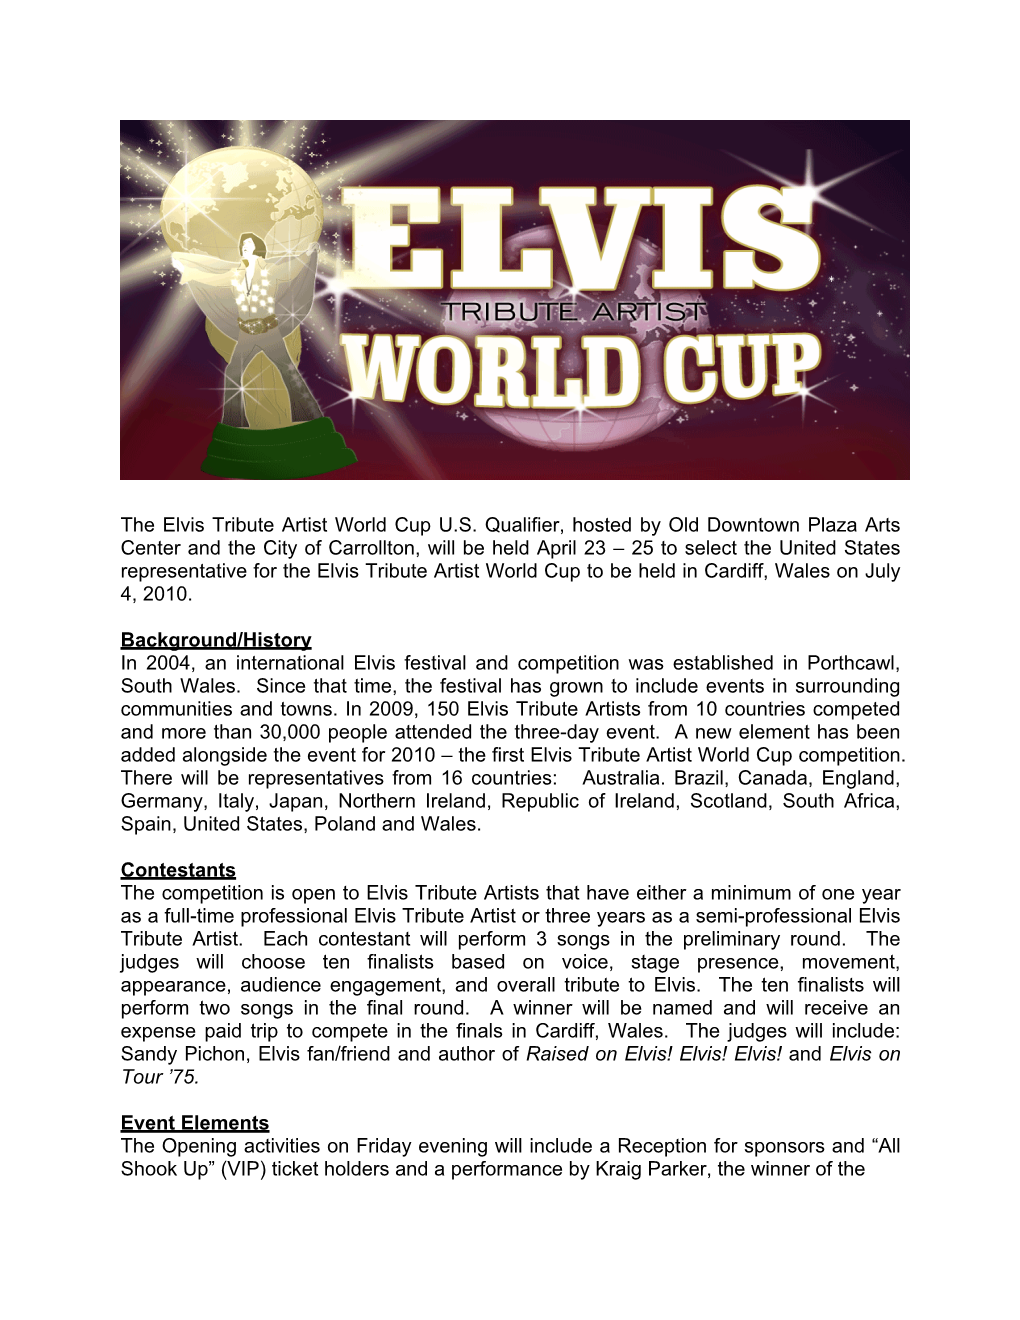 The Elvis Tribute Artist World Cup U.S. Qualifier, Hosted by Old Downtown